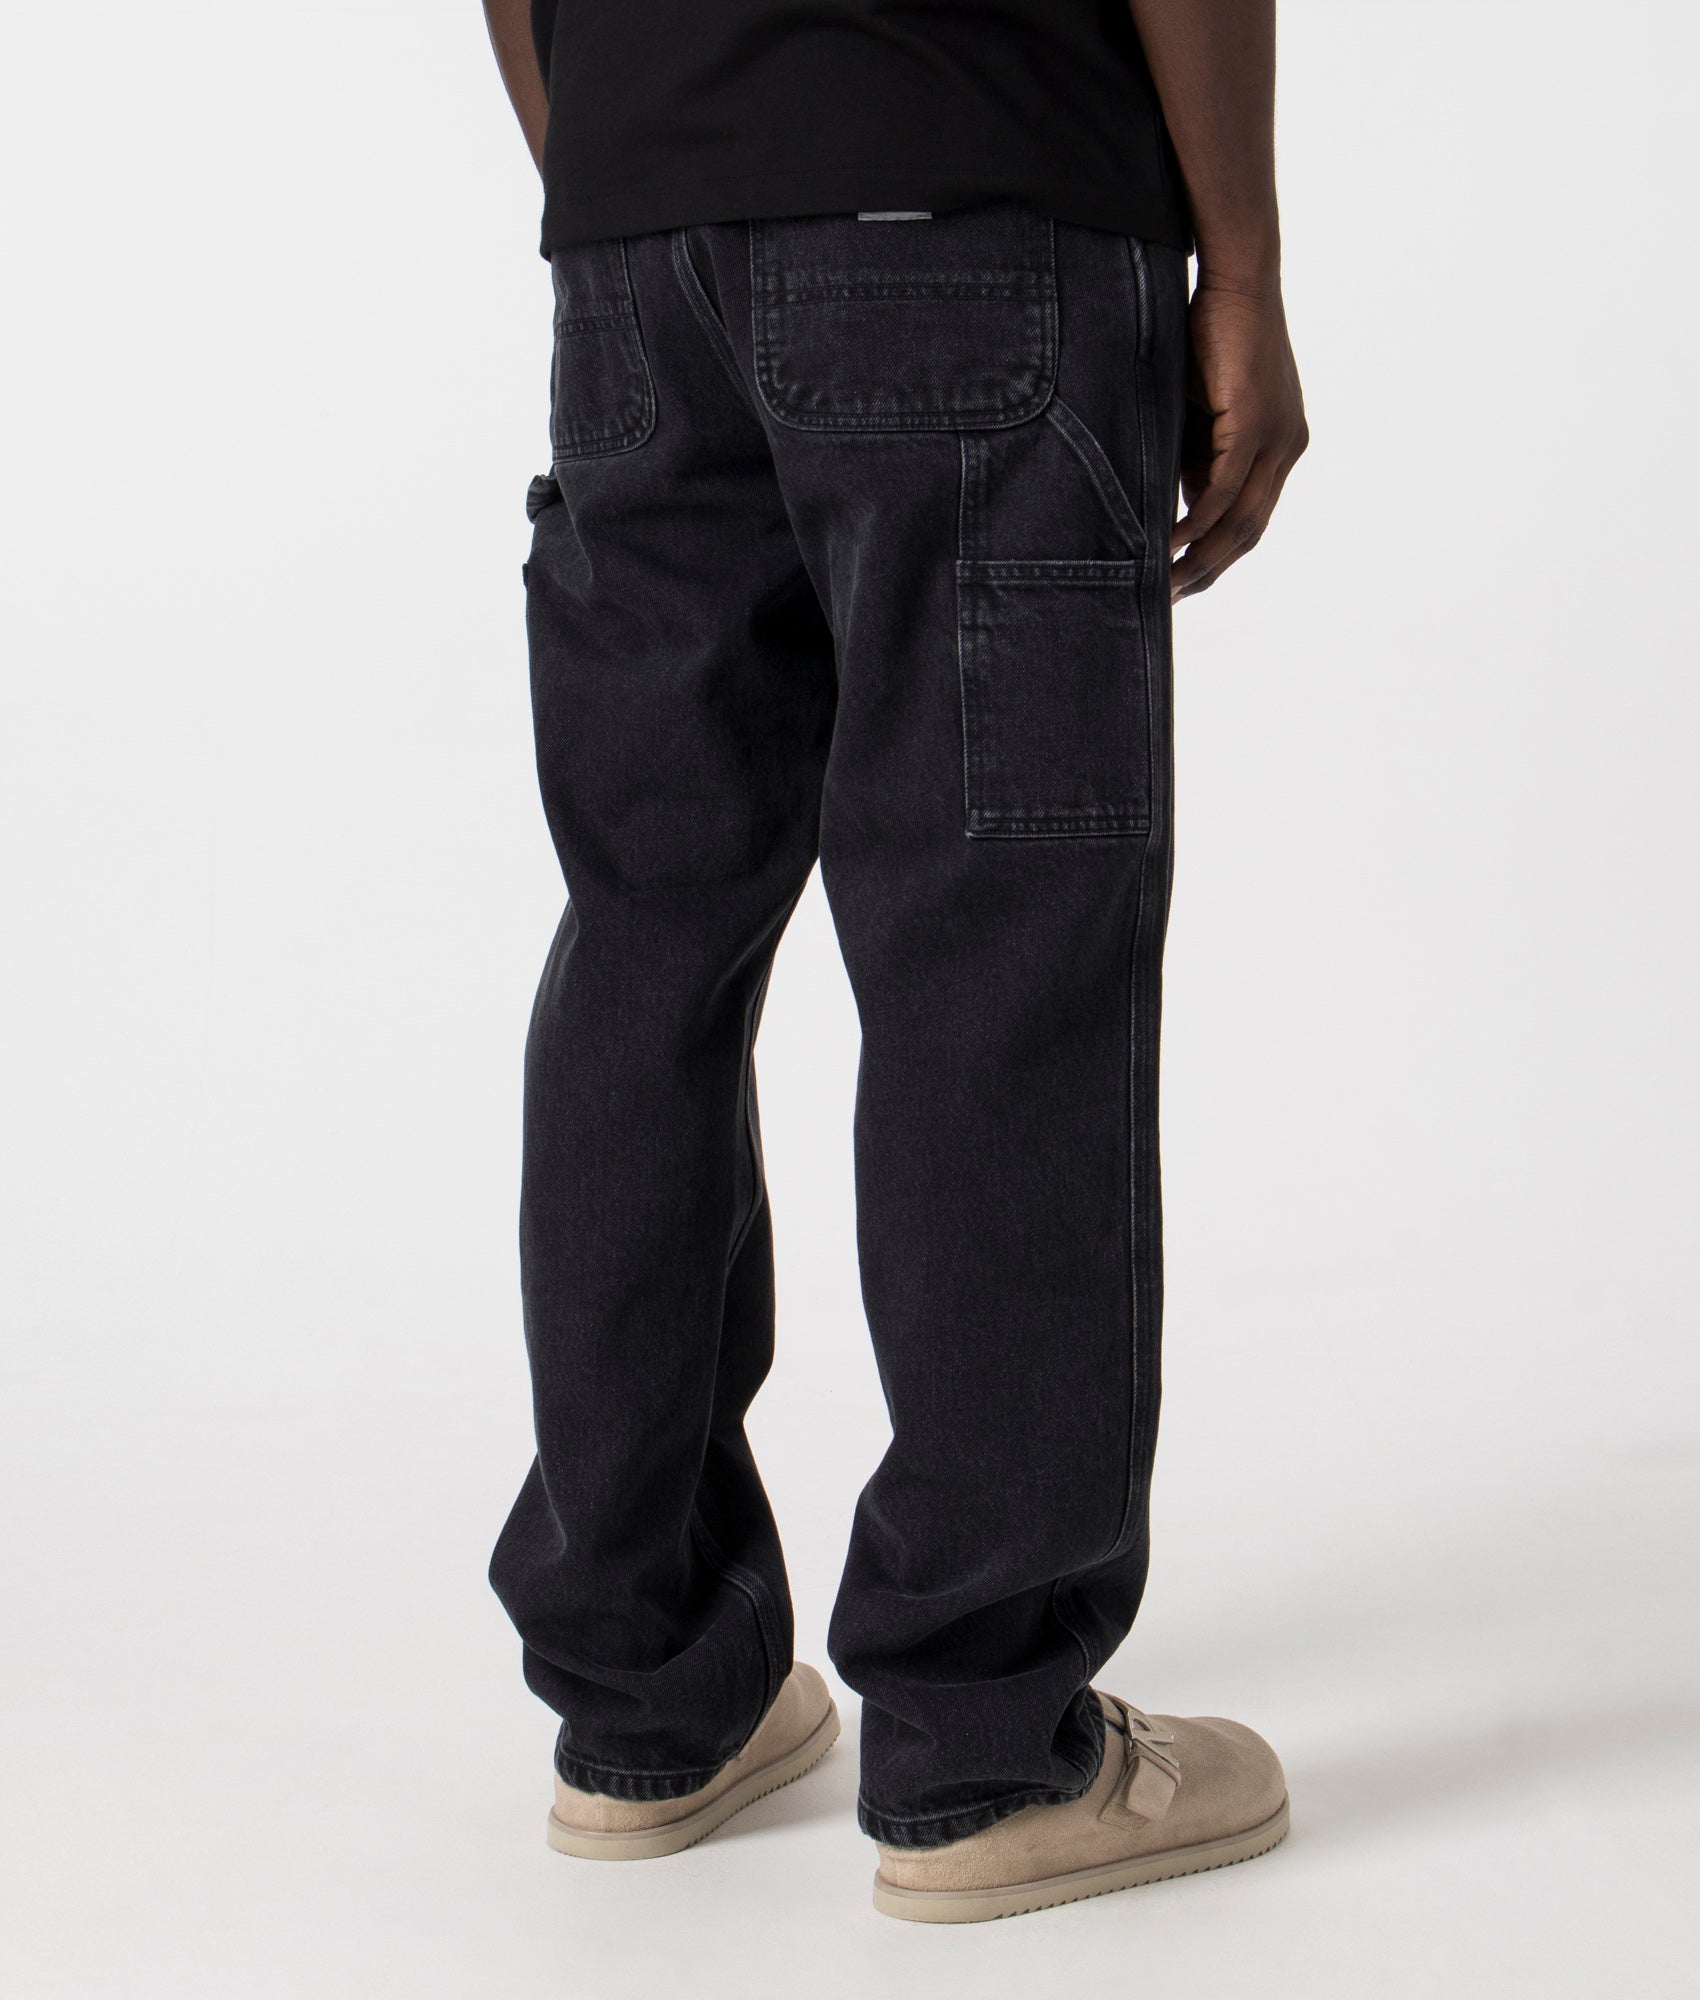 Carhartt WIP Mens Relaxed Fit Single Knee Pants - Colour: 8906 Black Stonewashed - Size: 34S